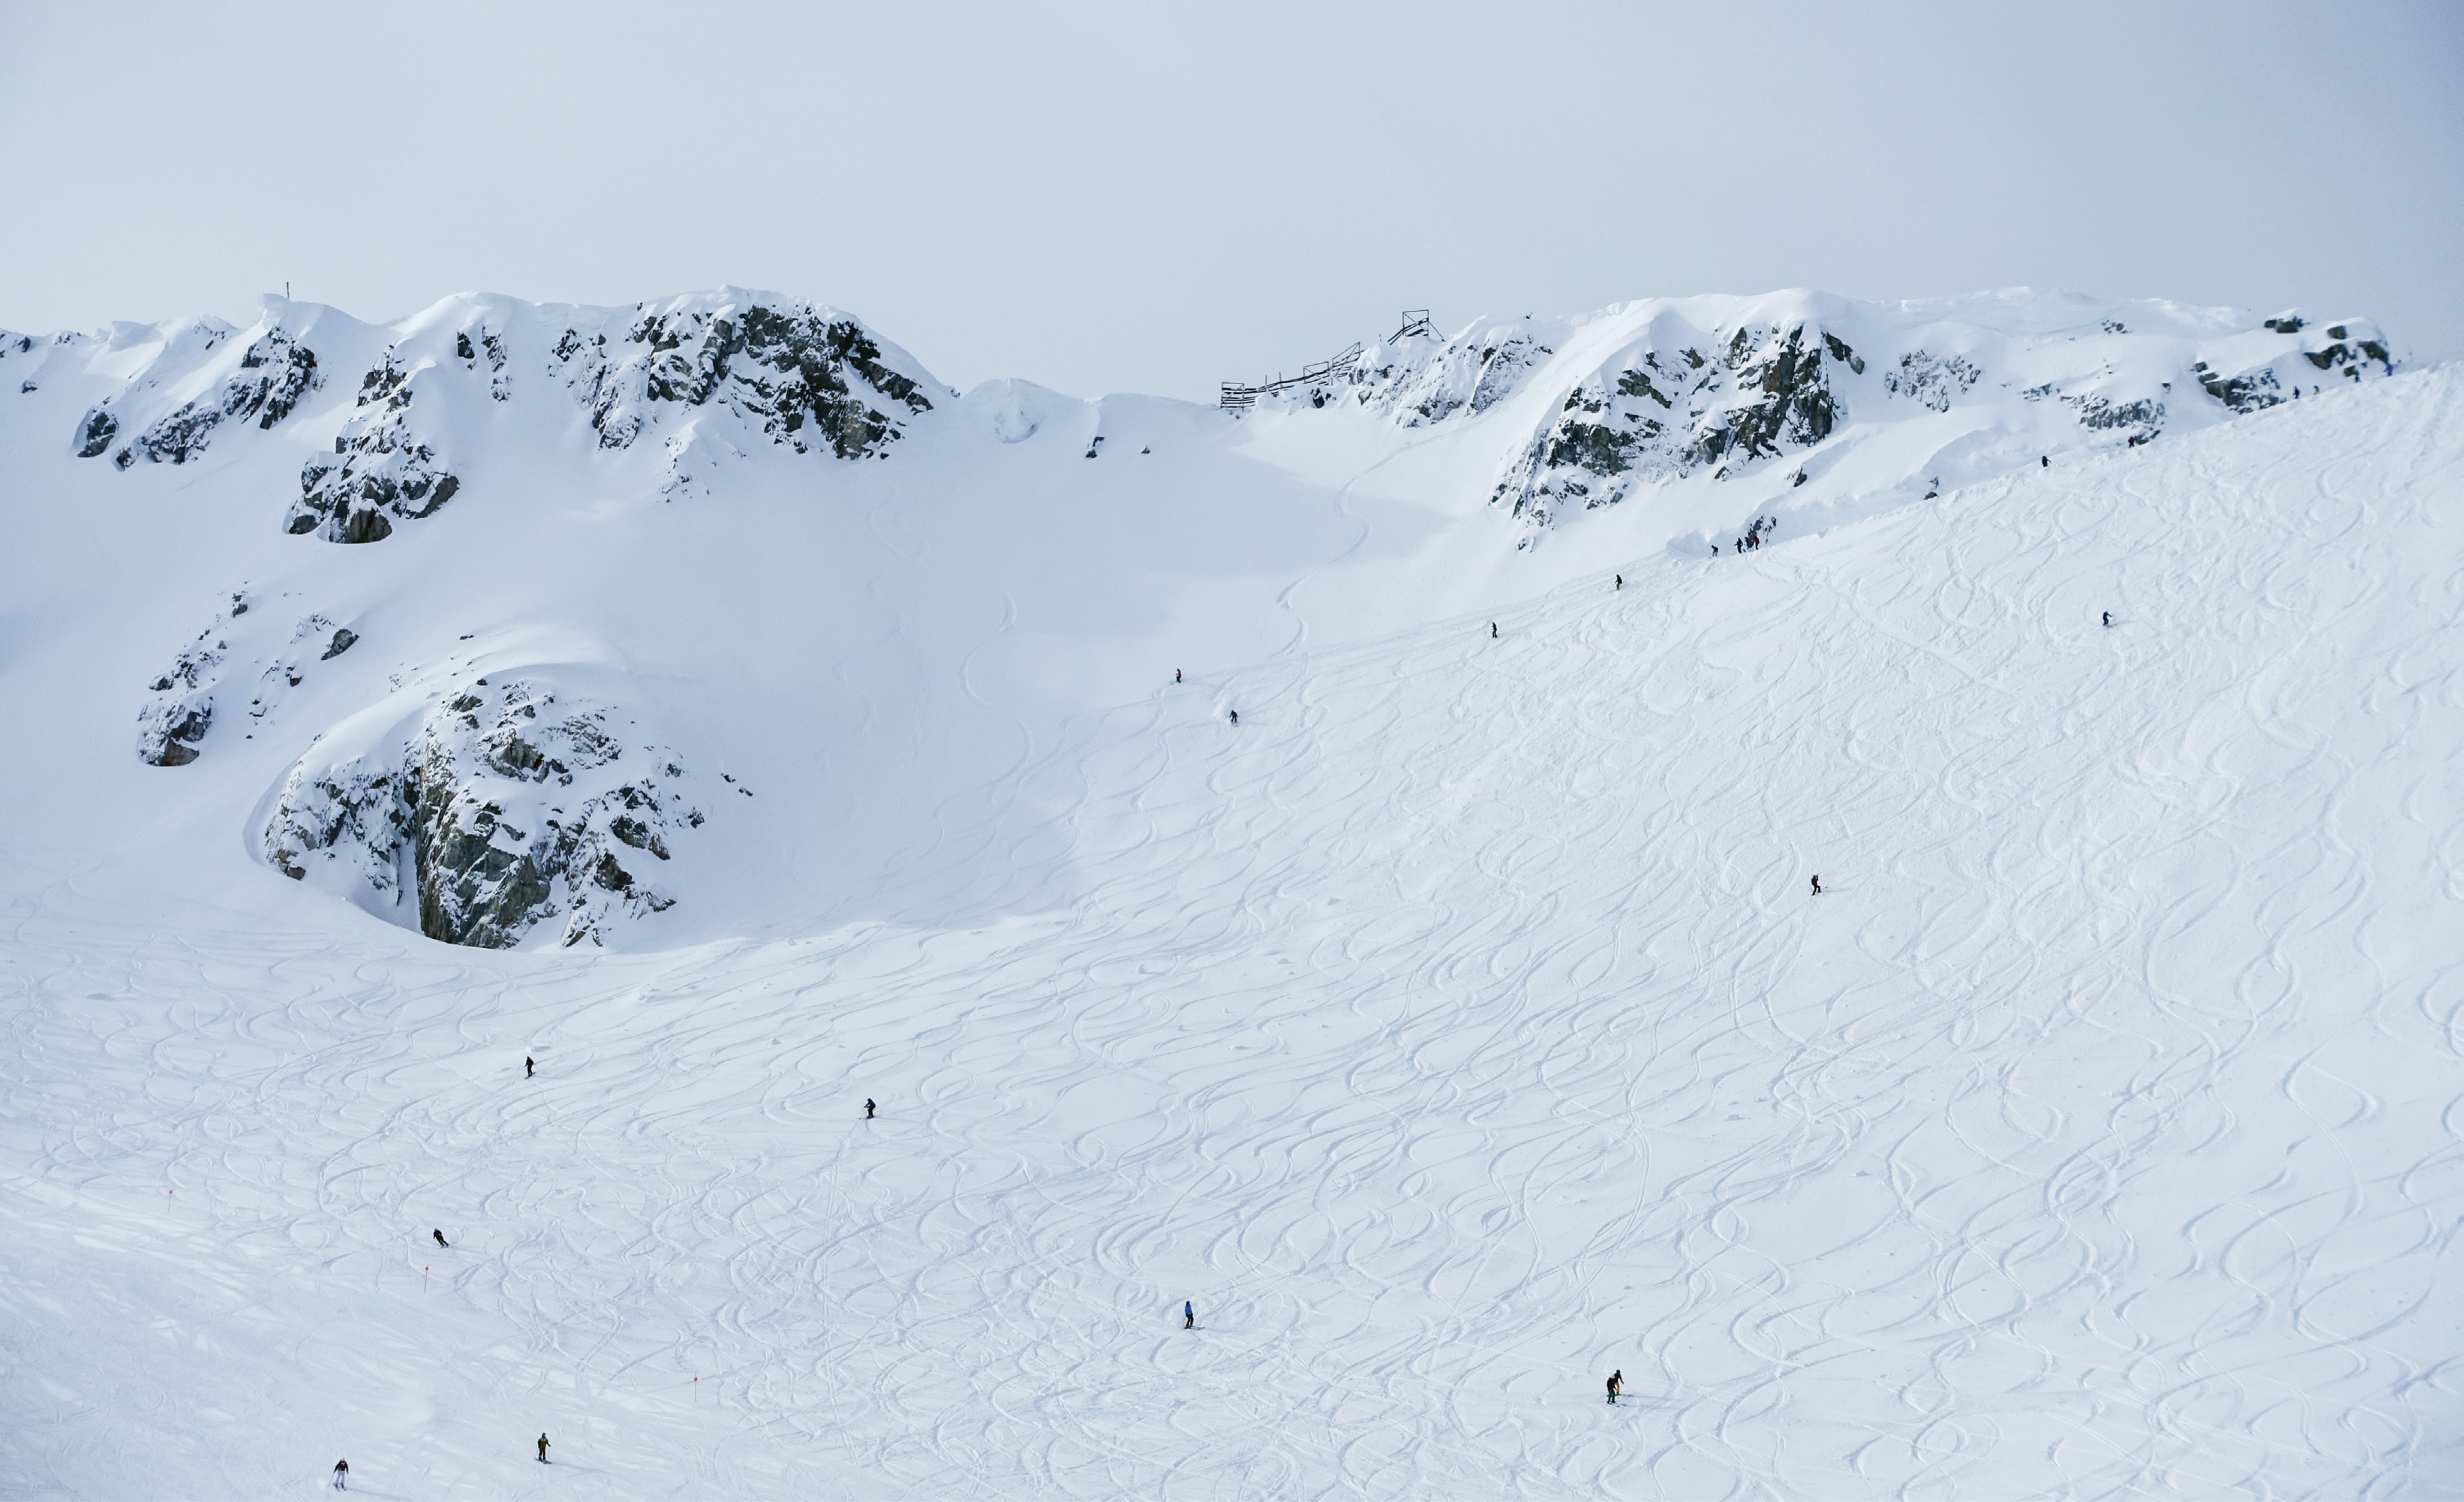 Bowls for Days: Whistler Blackcomb’s skiable terrain is so vast that there’s almost always a place to carve a few fresh tracks into a snowy bowl.